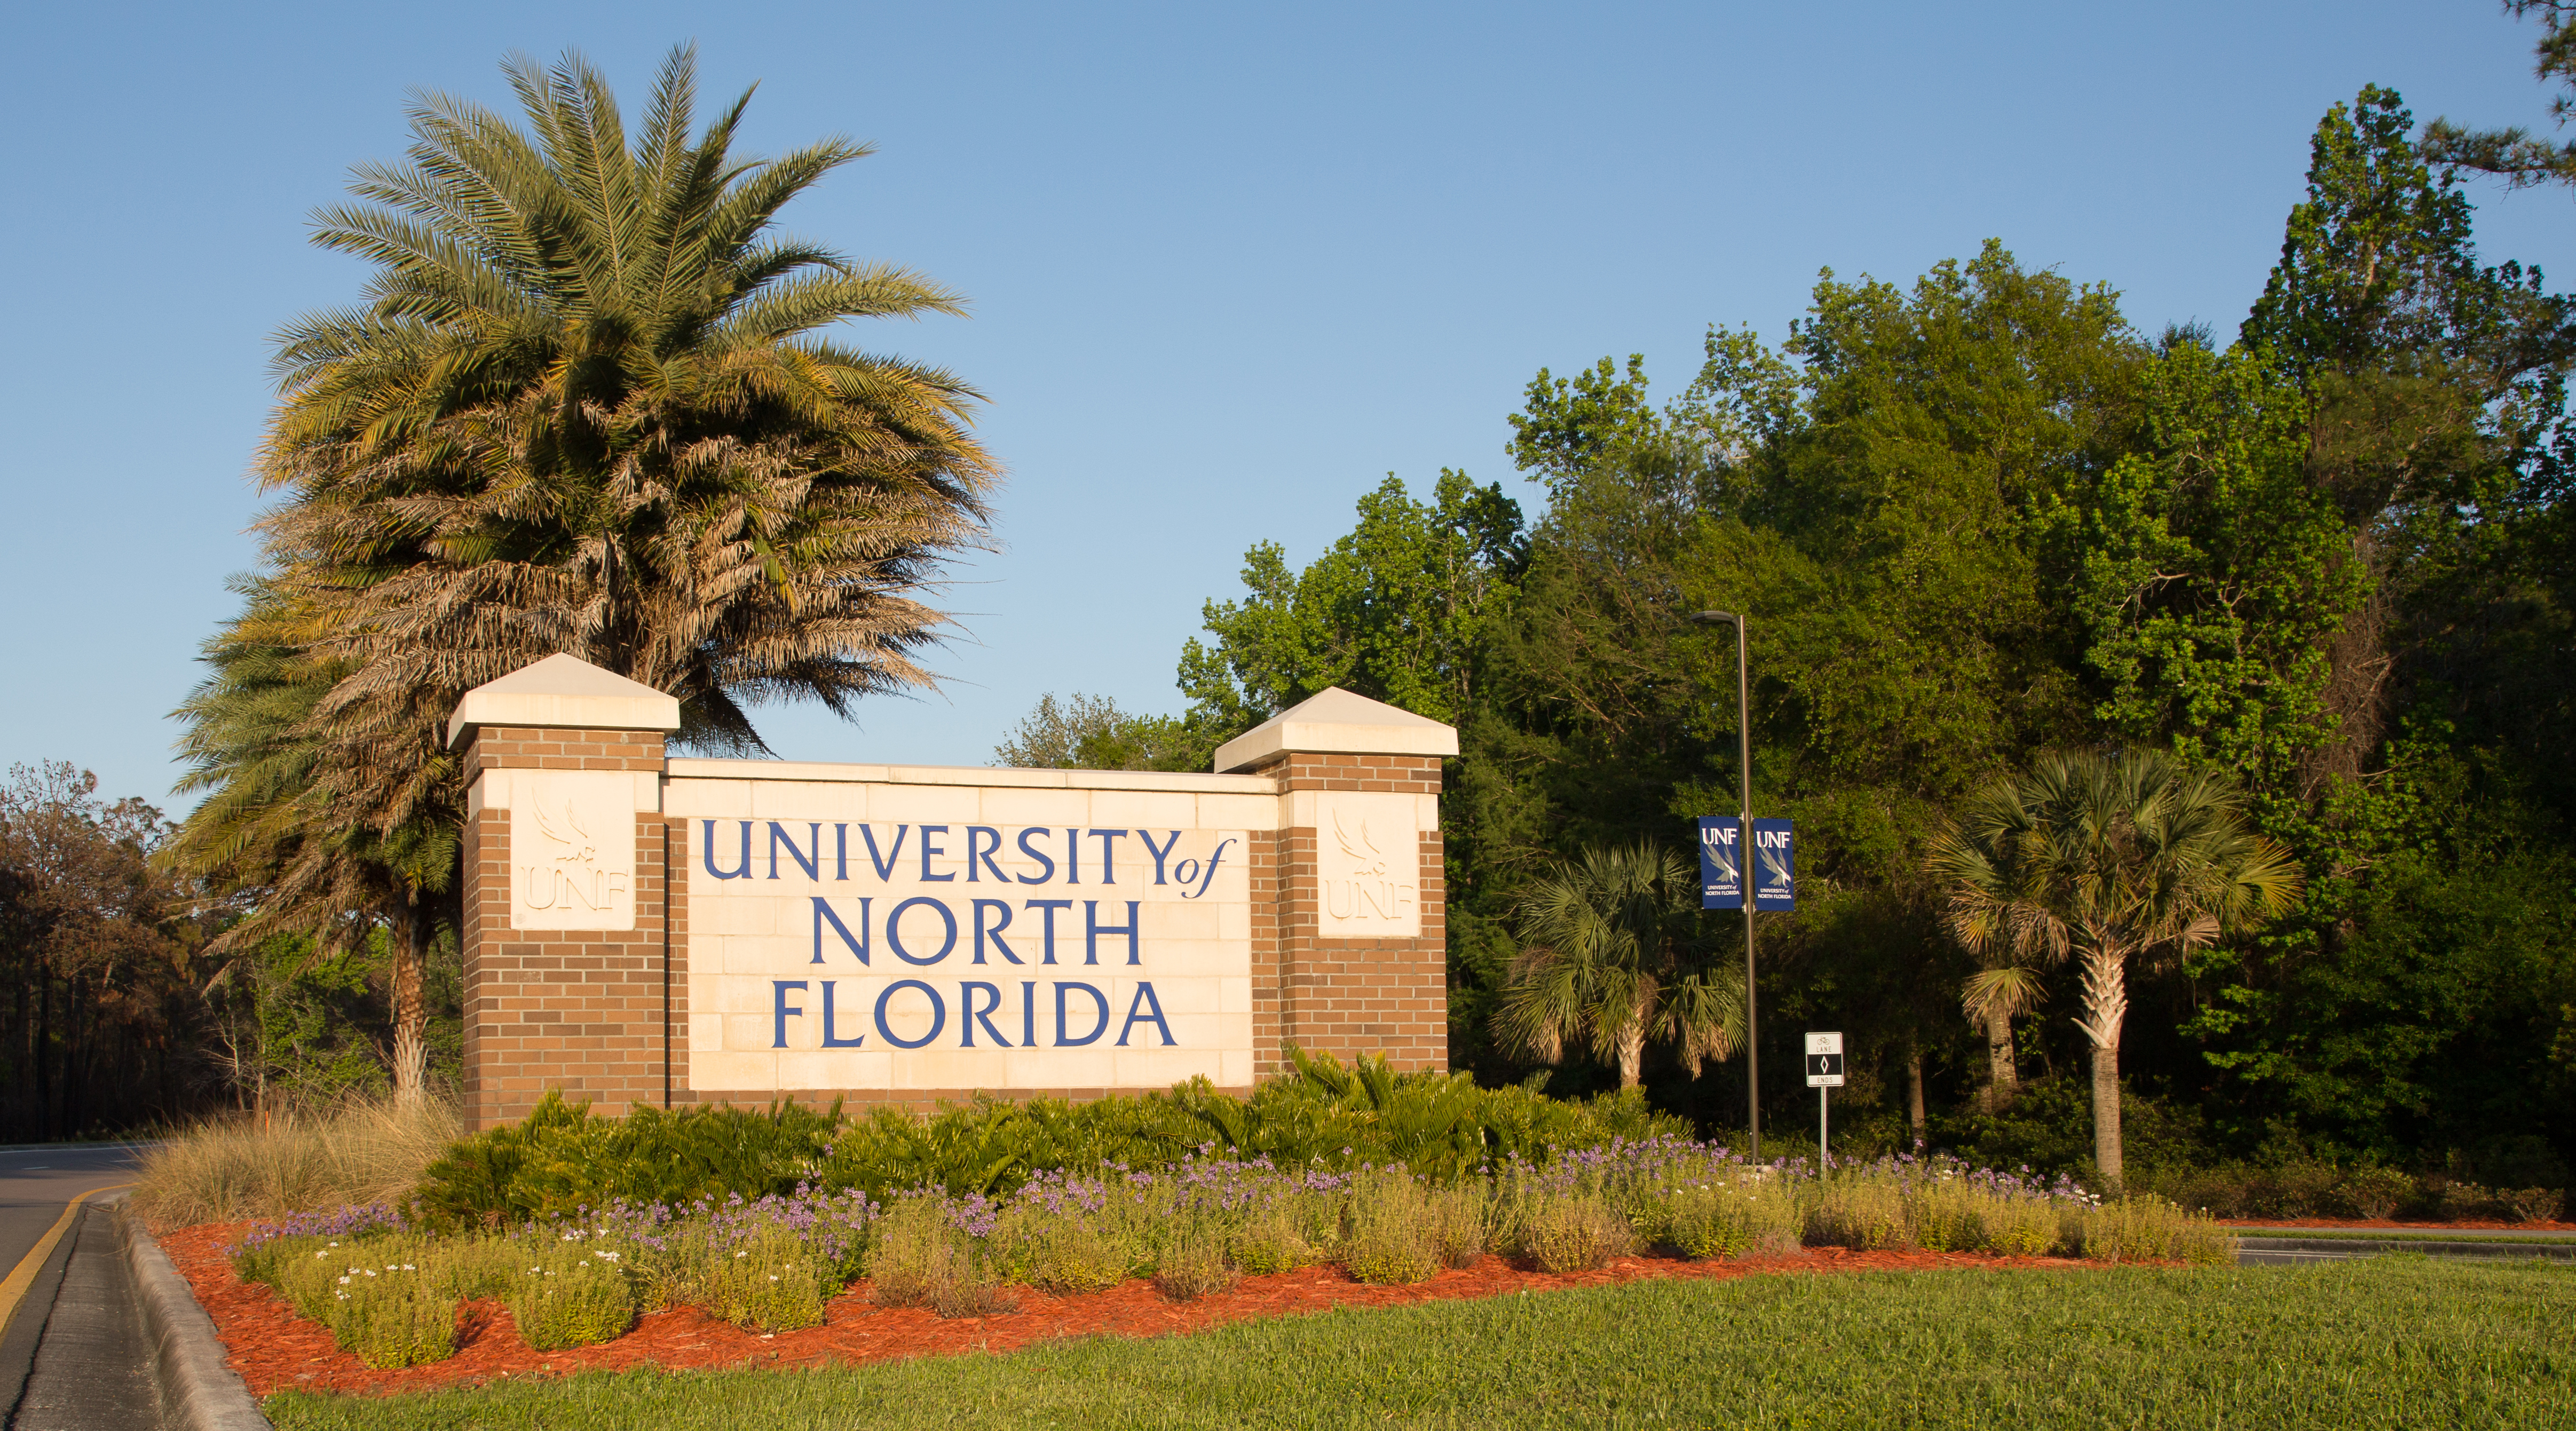 UNF entrance sign leading into campus